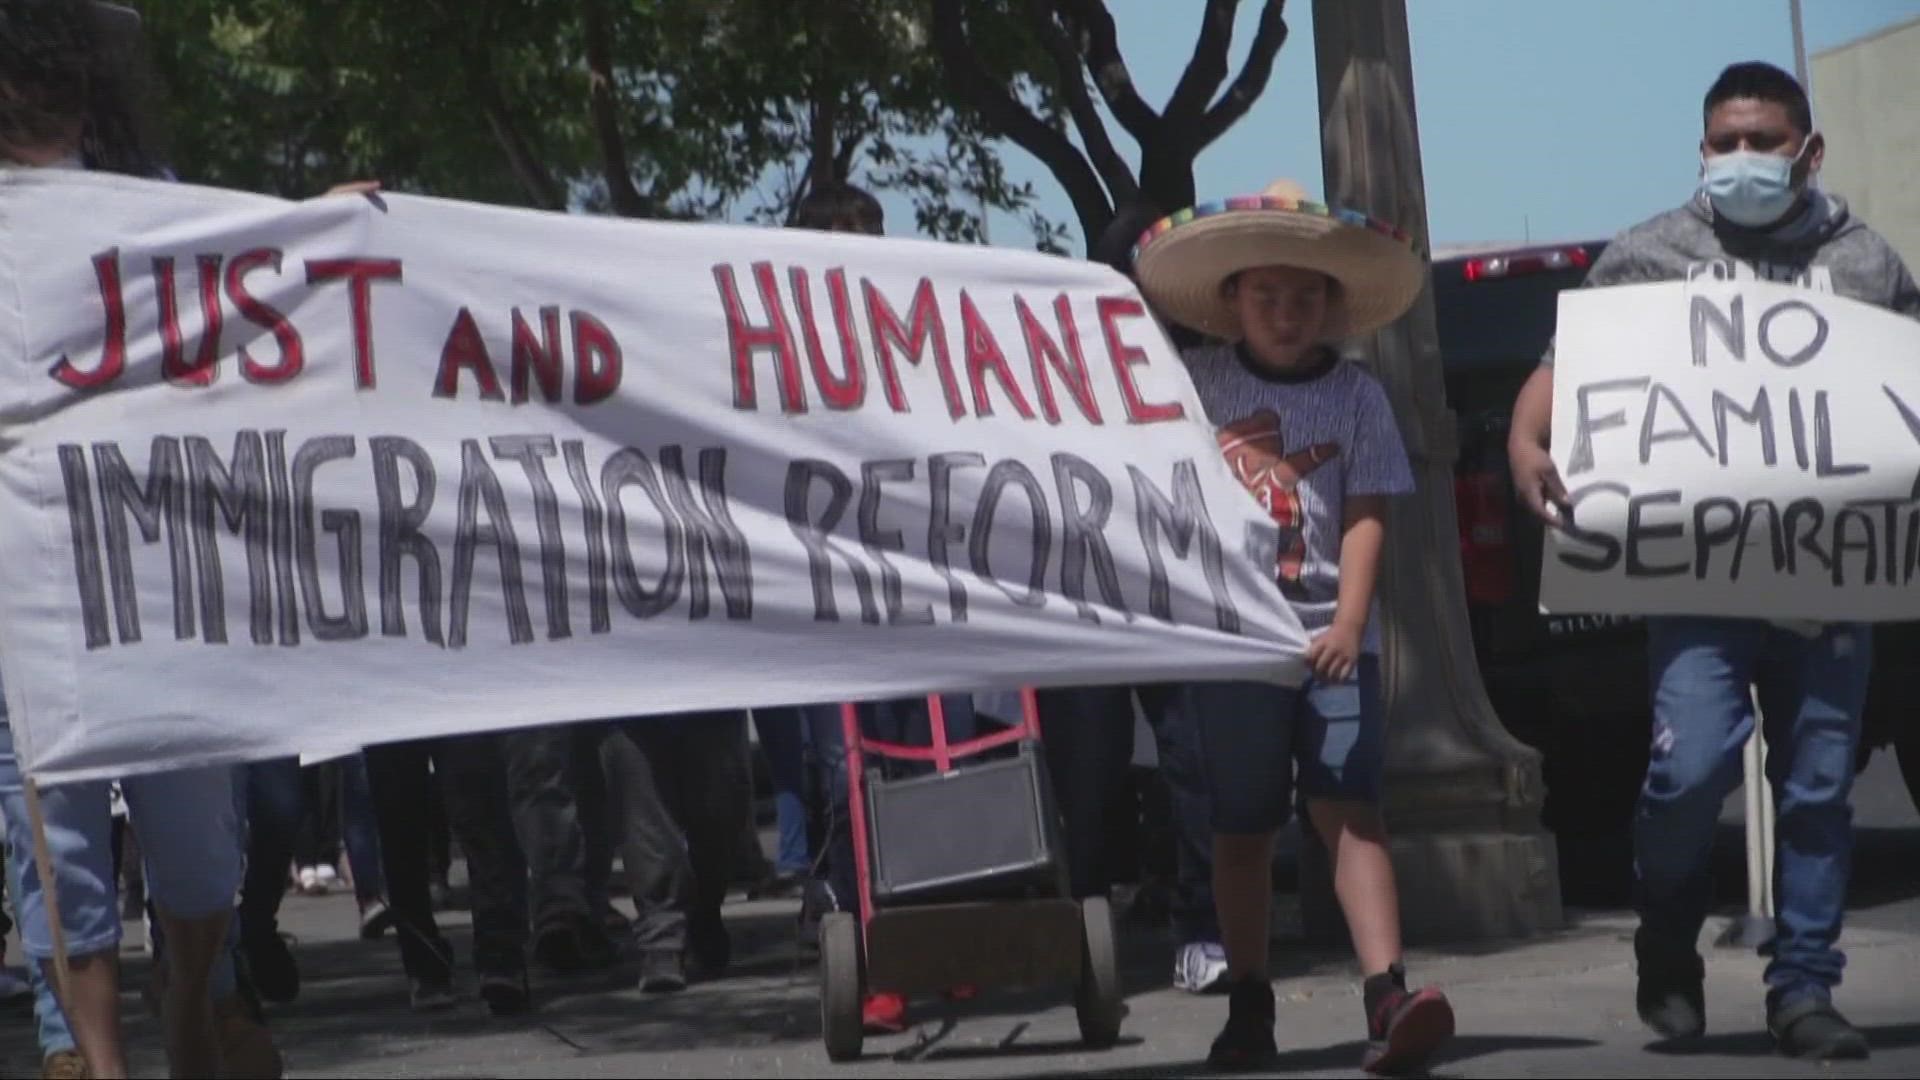 On May Day, families of migrant farm workers took to the streets in Stockton to demand justice and and reform.